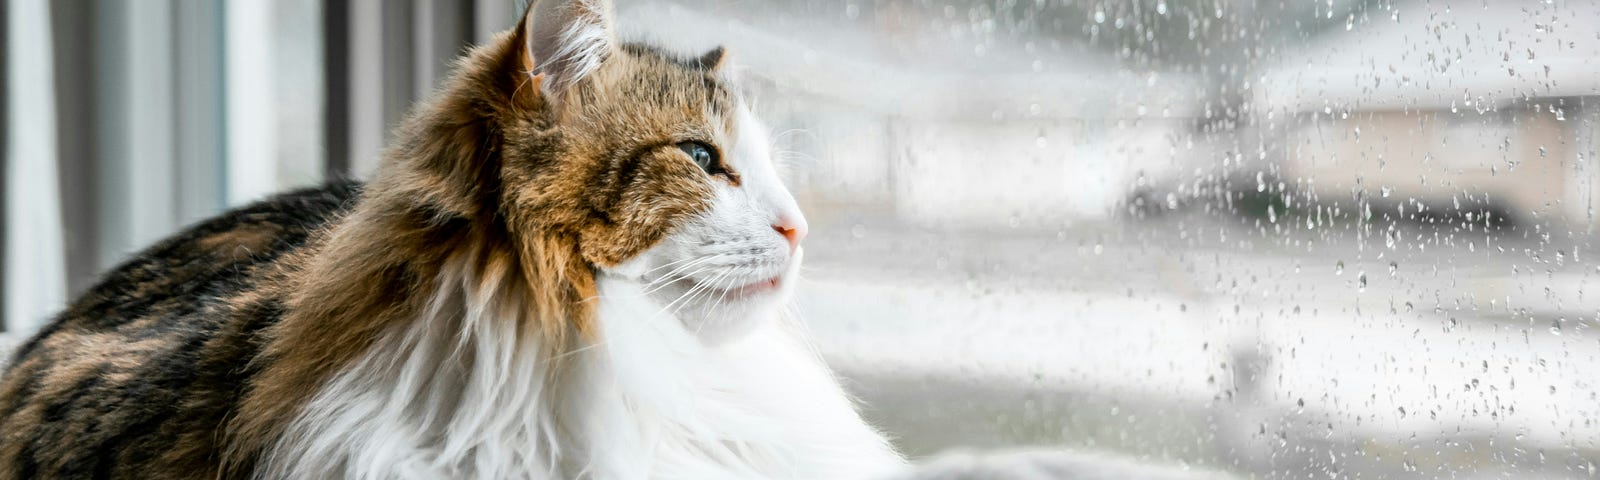 cat looking out the window at a rainy day